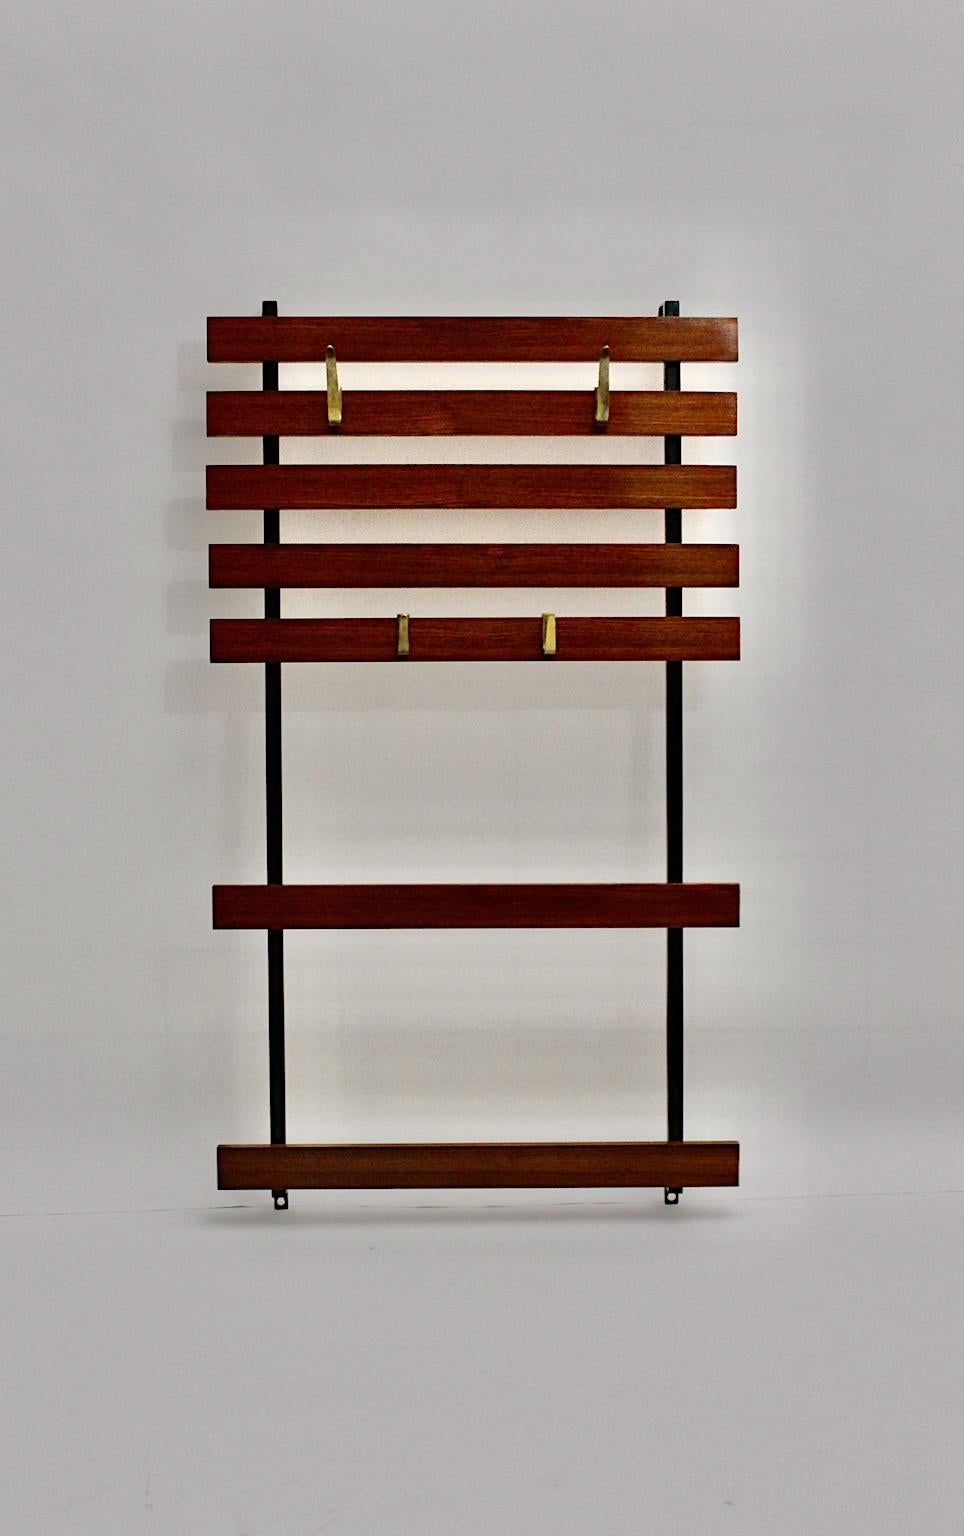 Mid-Century Modern vintage walnut coat rack with 4 cast solid brass hooks, which was designed and manufactured in Vienna, Austria.
The black lacquered metal frame shows 7 hardwood stained slats, which is provided for wall mounting, while the 4 cast